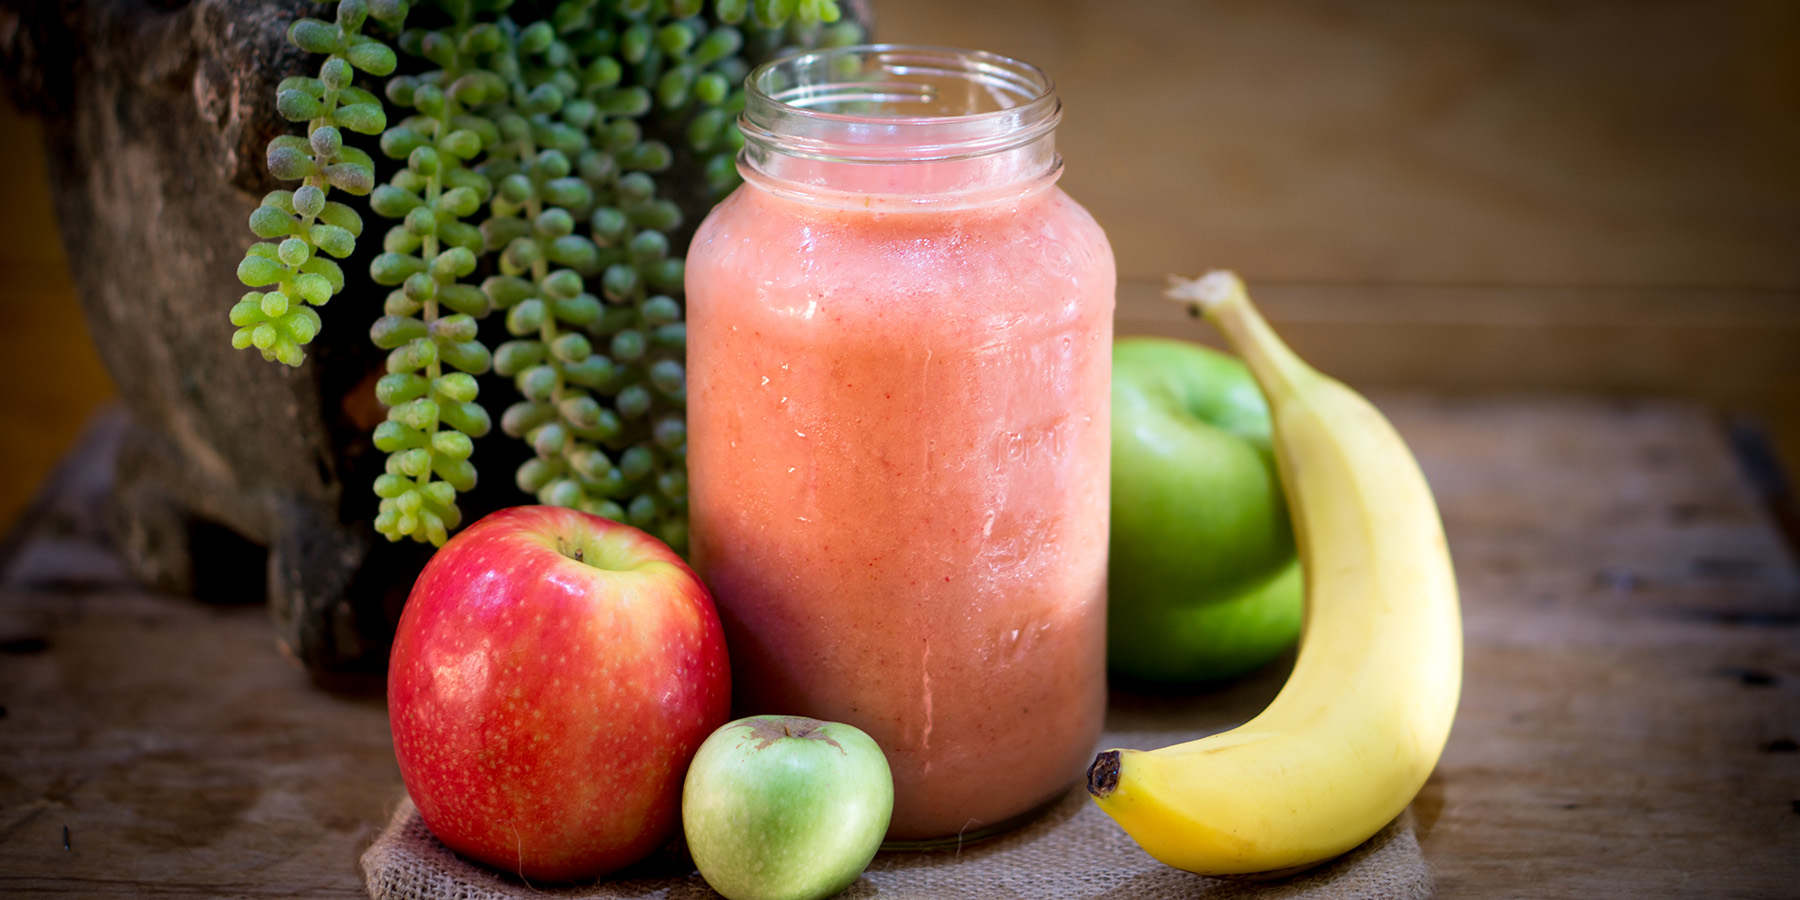 The Bapple Berry Smoothie